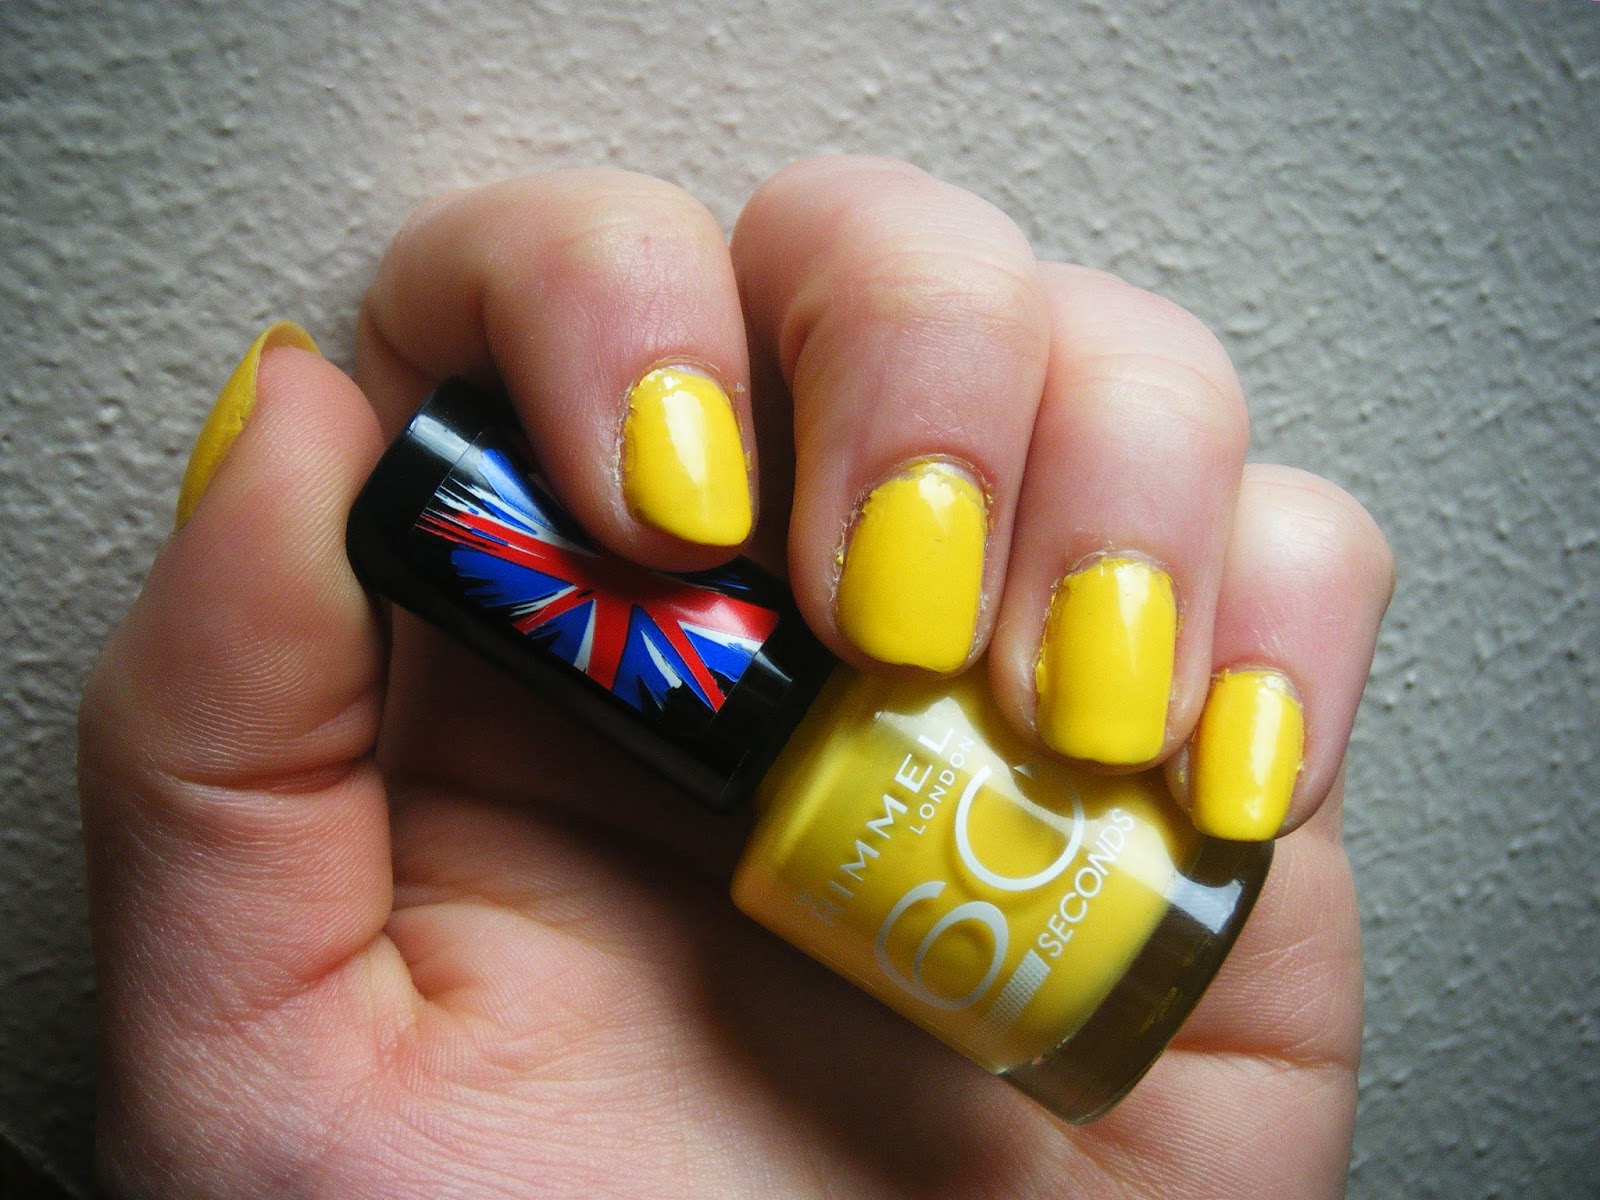 7. "Sun-kissed" yellow nail polish for a sunny 2024 vacation look - wide 1